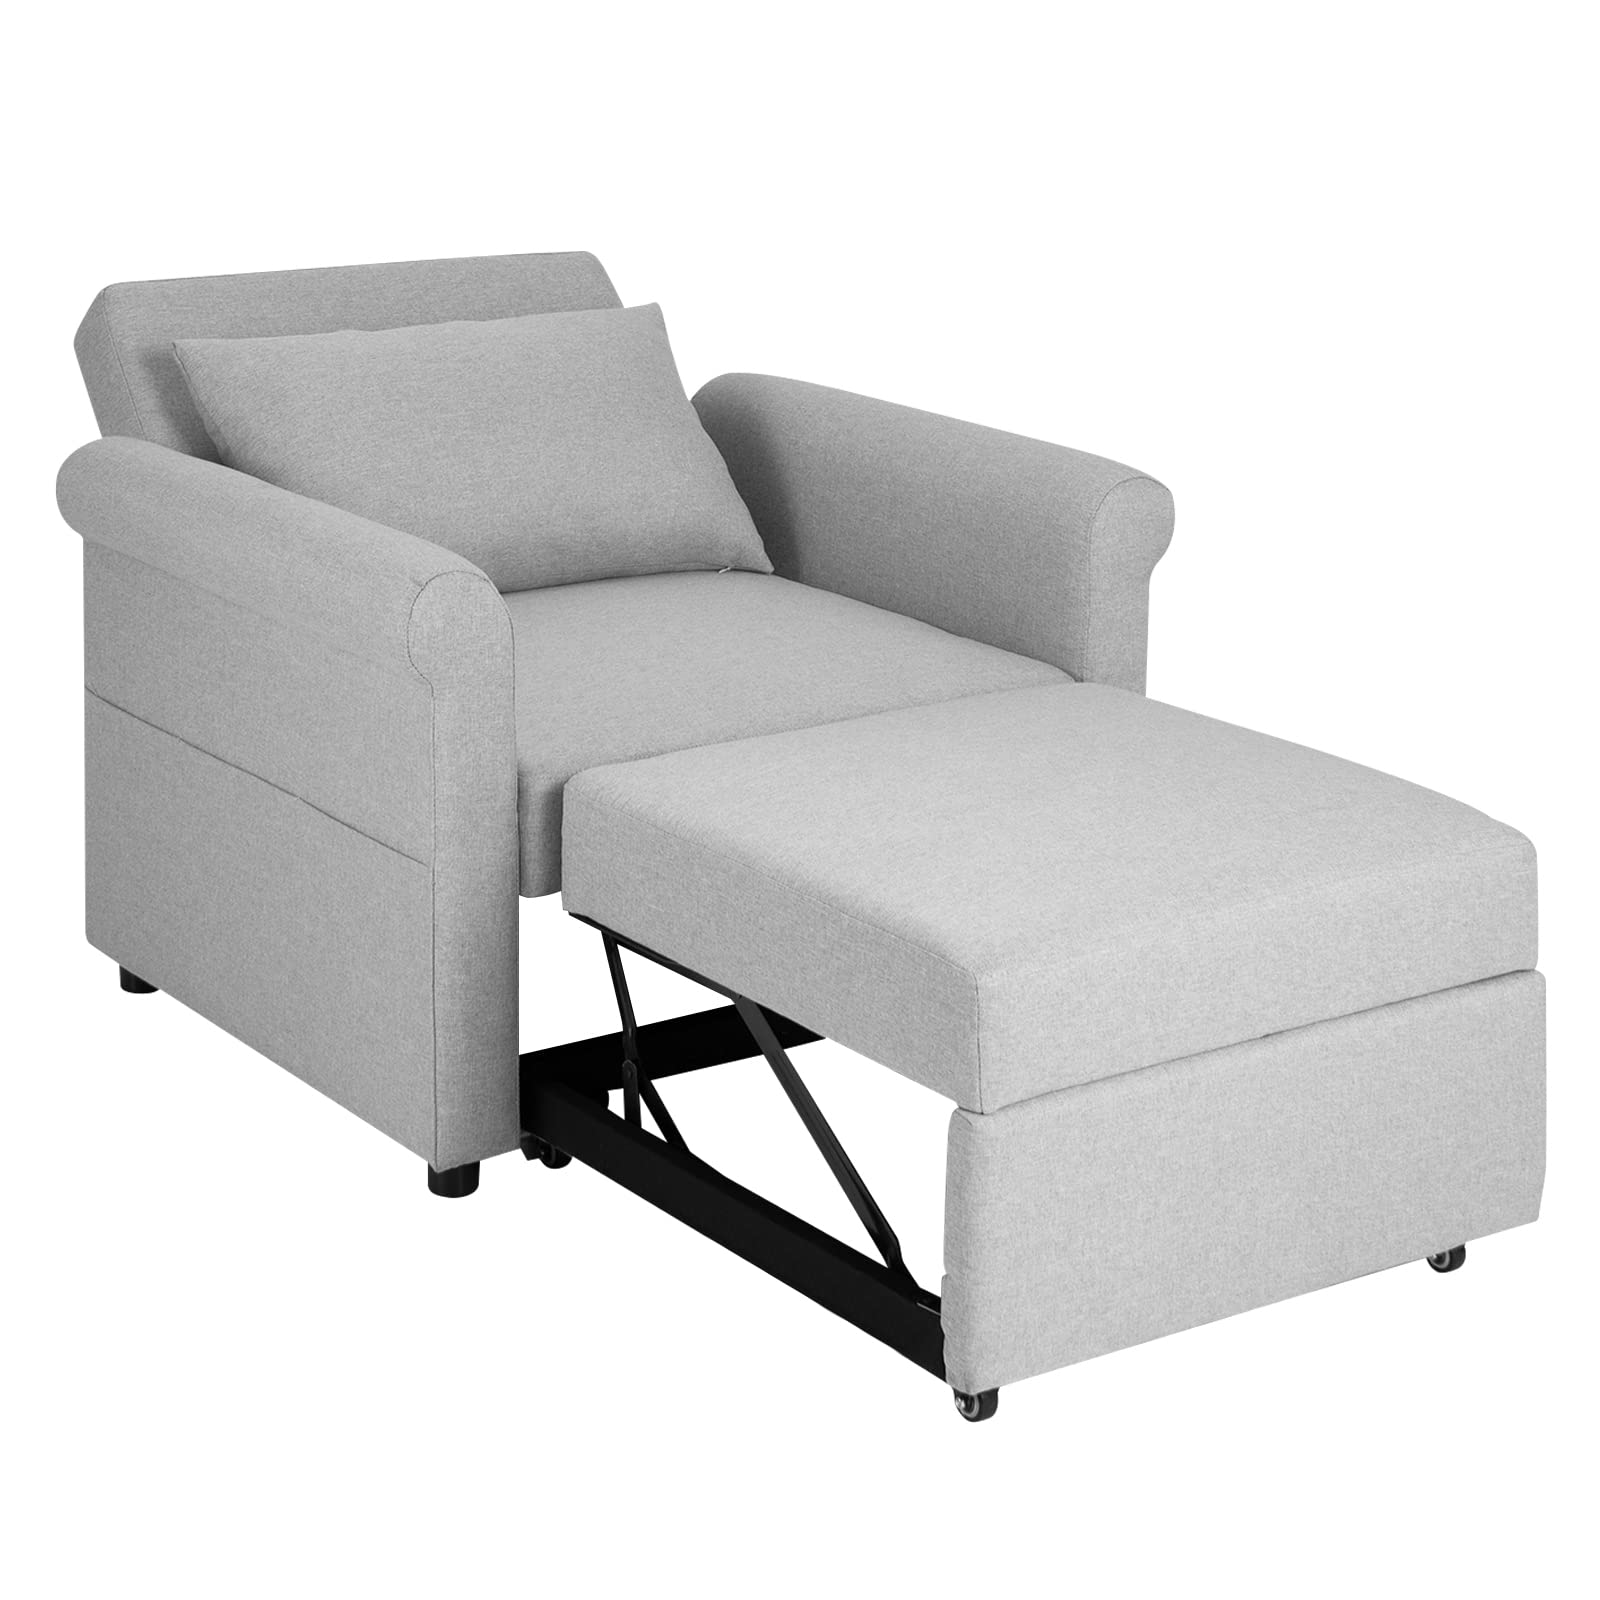 Giantex Convertible Sofa Sleeper - 3-in-1 Pull-Out Chair Bed, Adjustable Recliner Backrest